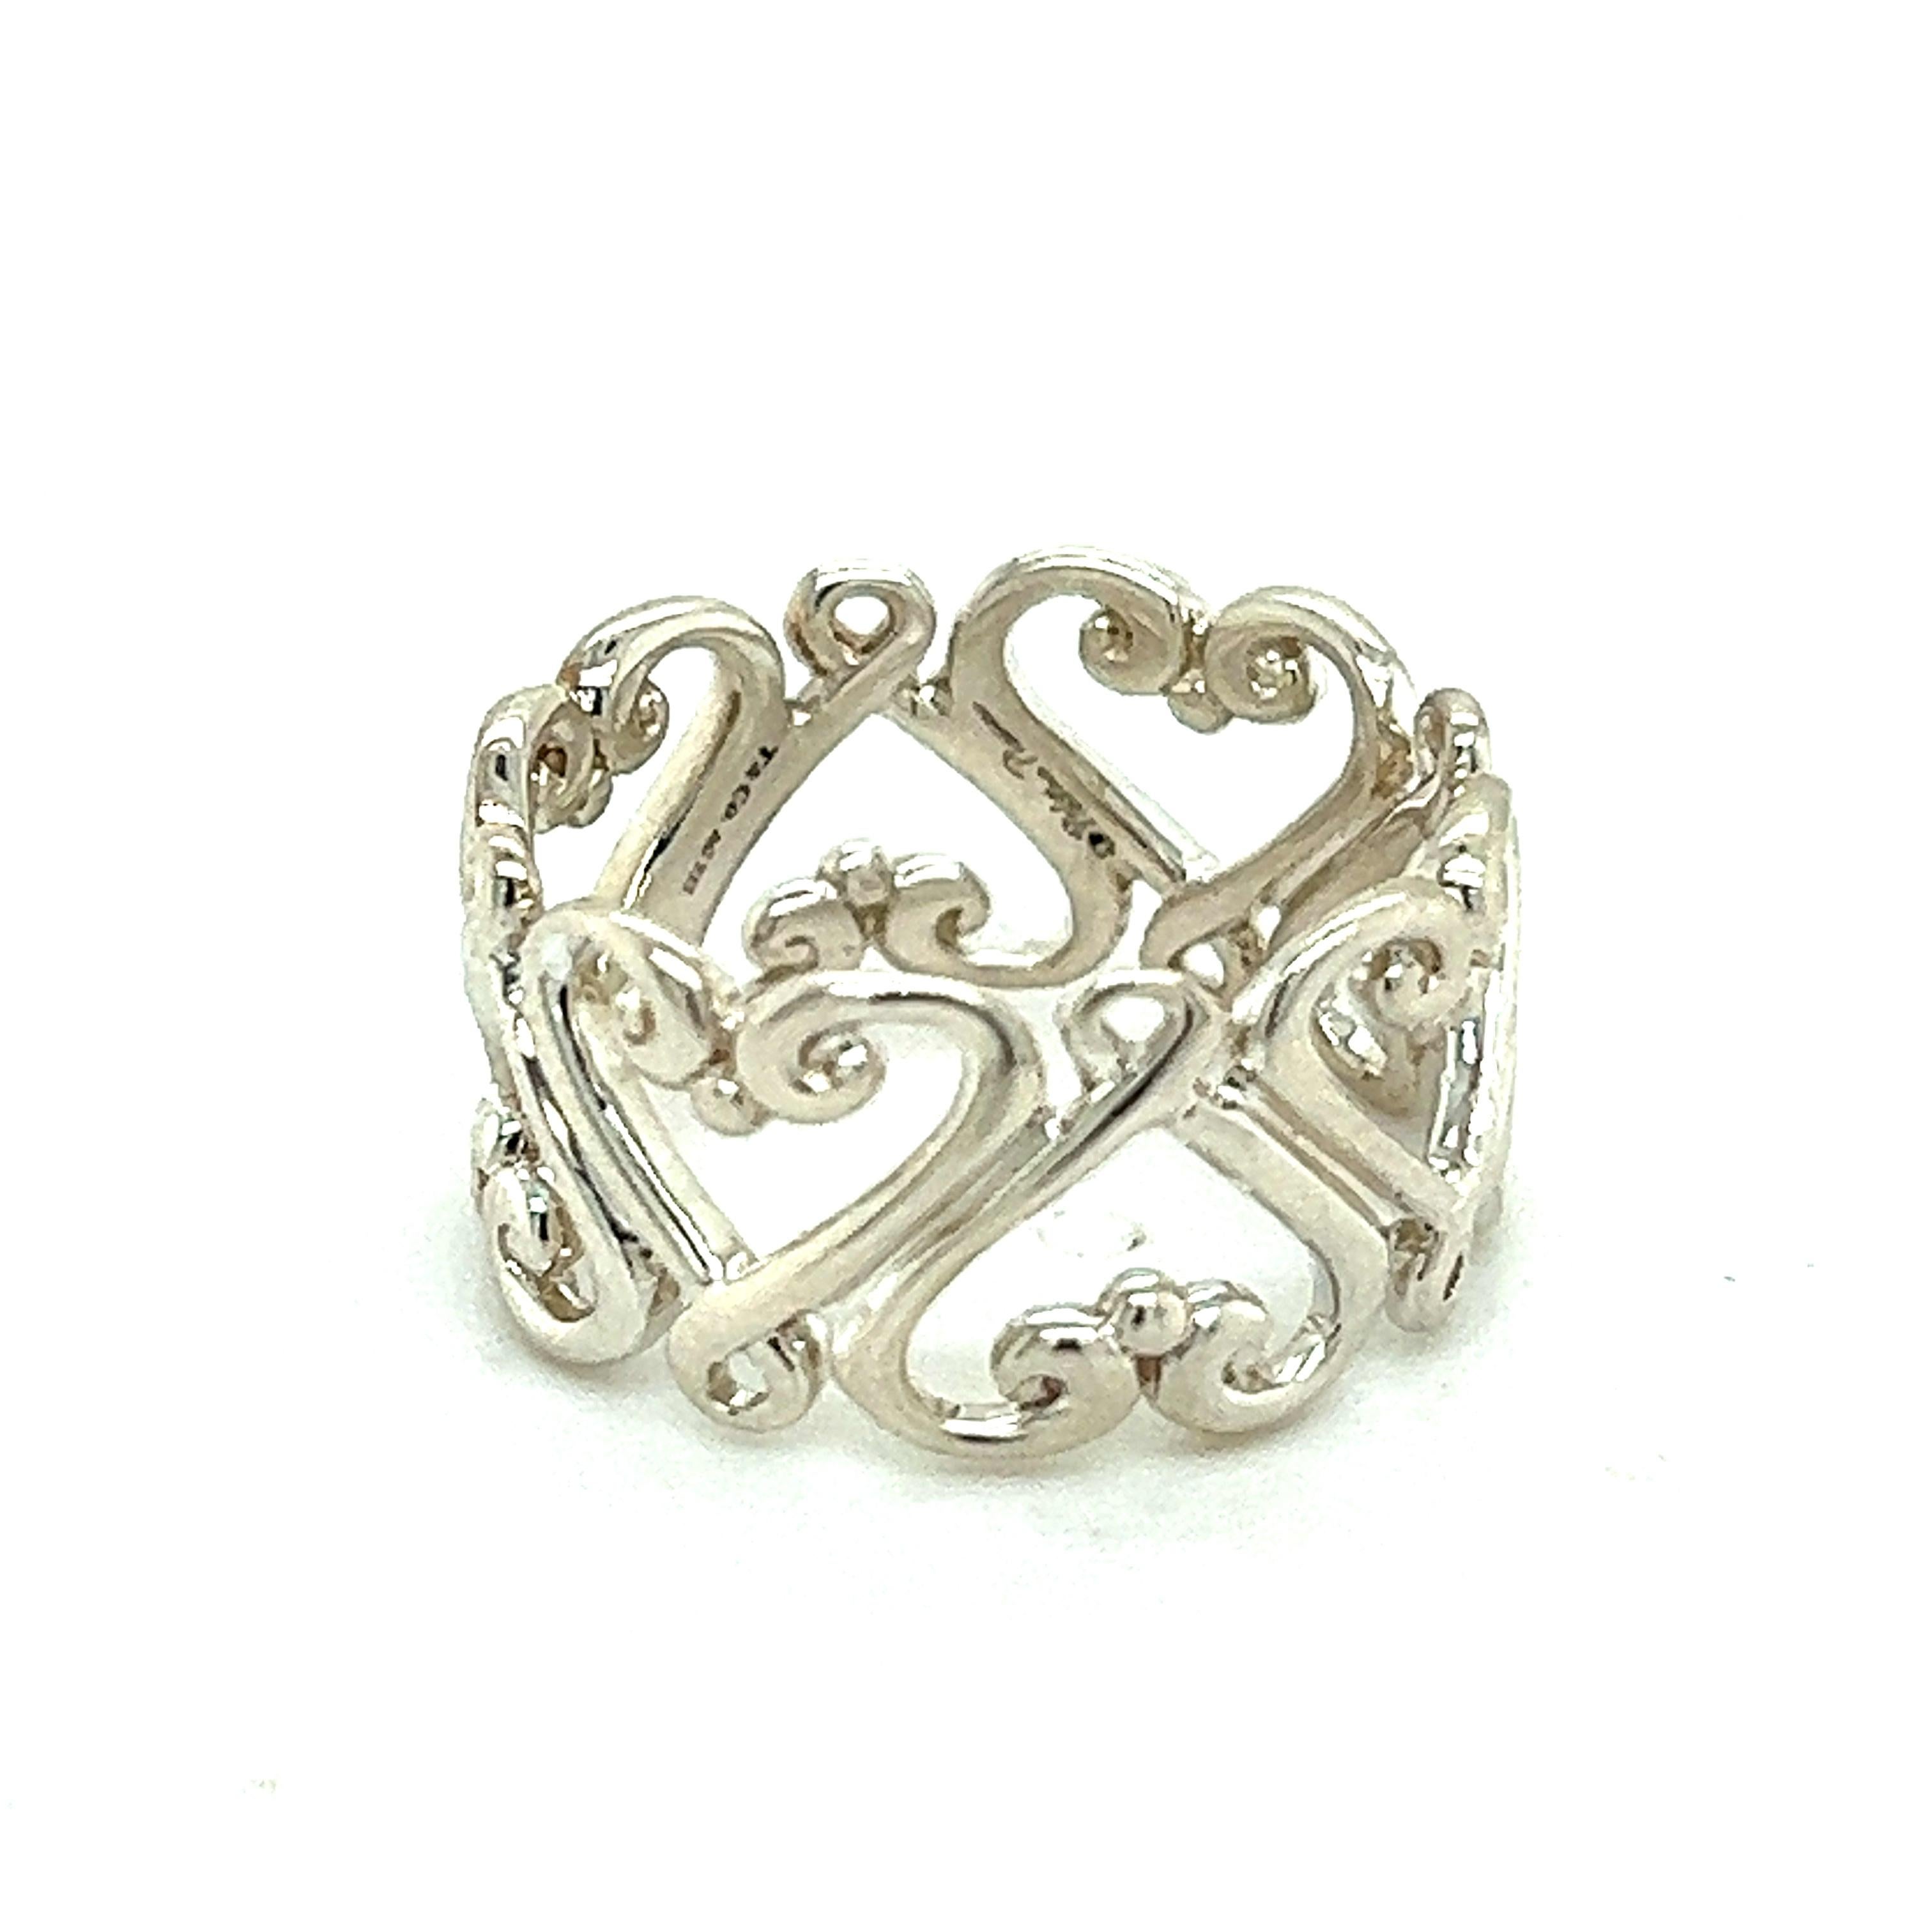 Authentic Tiffany & Co Estate Heart Band Ring 5 Silver By Paloma Picasso TIF462

This elegant Authentic Tiffany & Co Ring.

TRUSTED SELLER SINCE 2002

PLEASE SEE OUR HUNDREDS OF POSITIVE FEEDBACKS FROM OUR CLIENTS!!

FREE SHIPPING!!

DETAILS
Size: